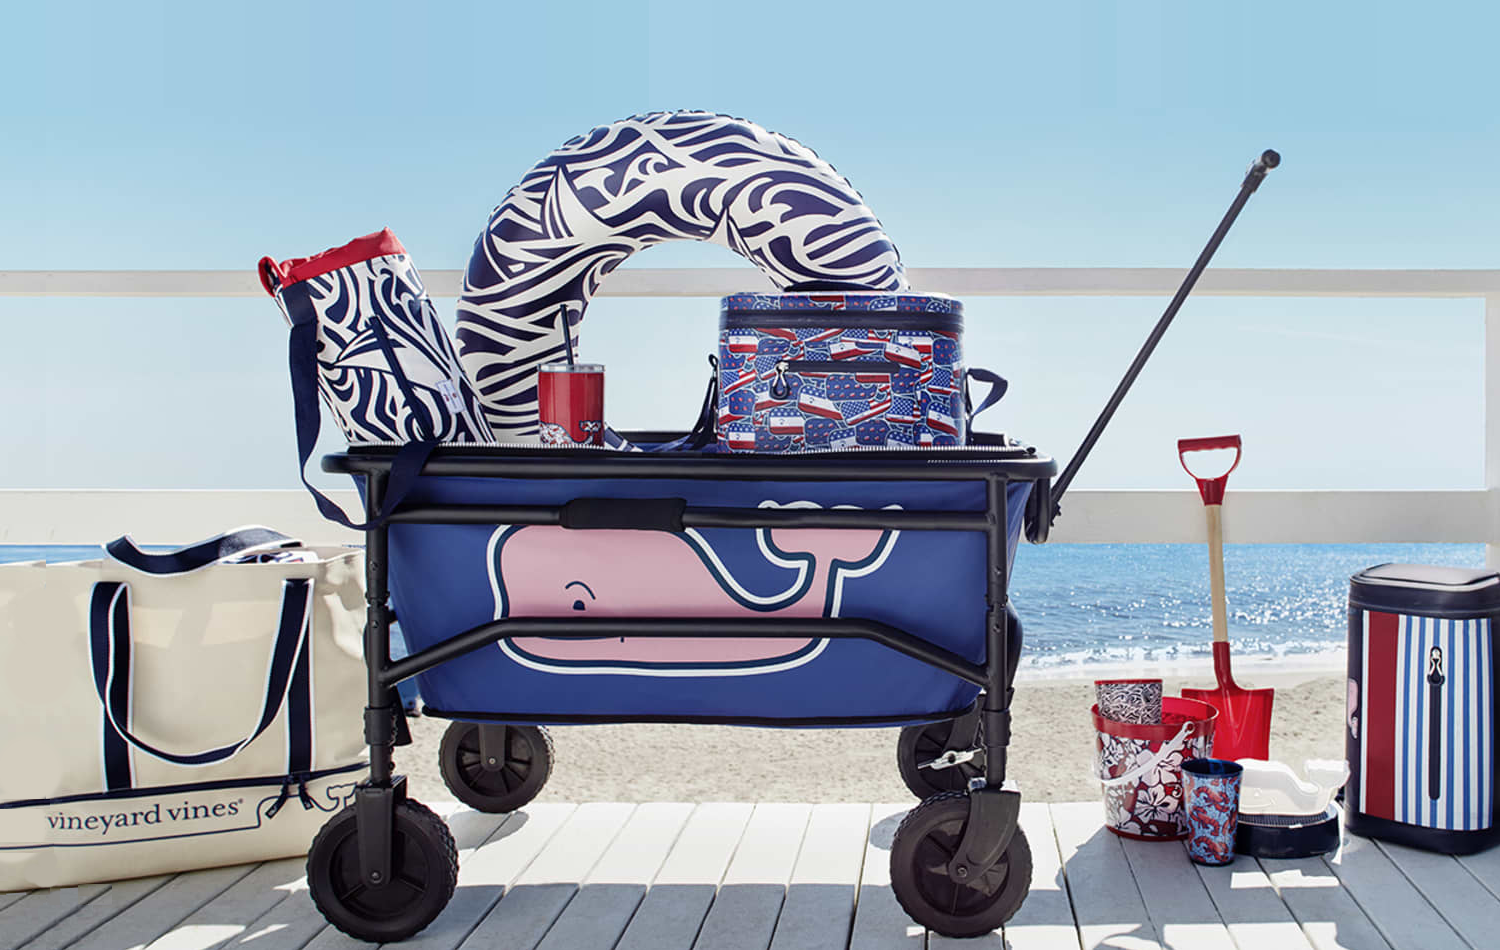 Exclusive discounts for educators on Vineyard Vines apparel and accessories.